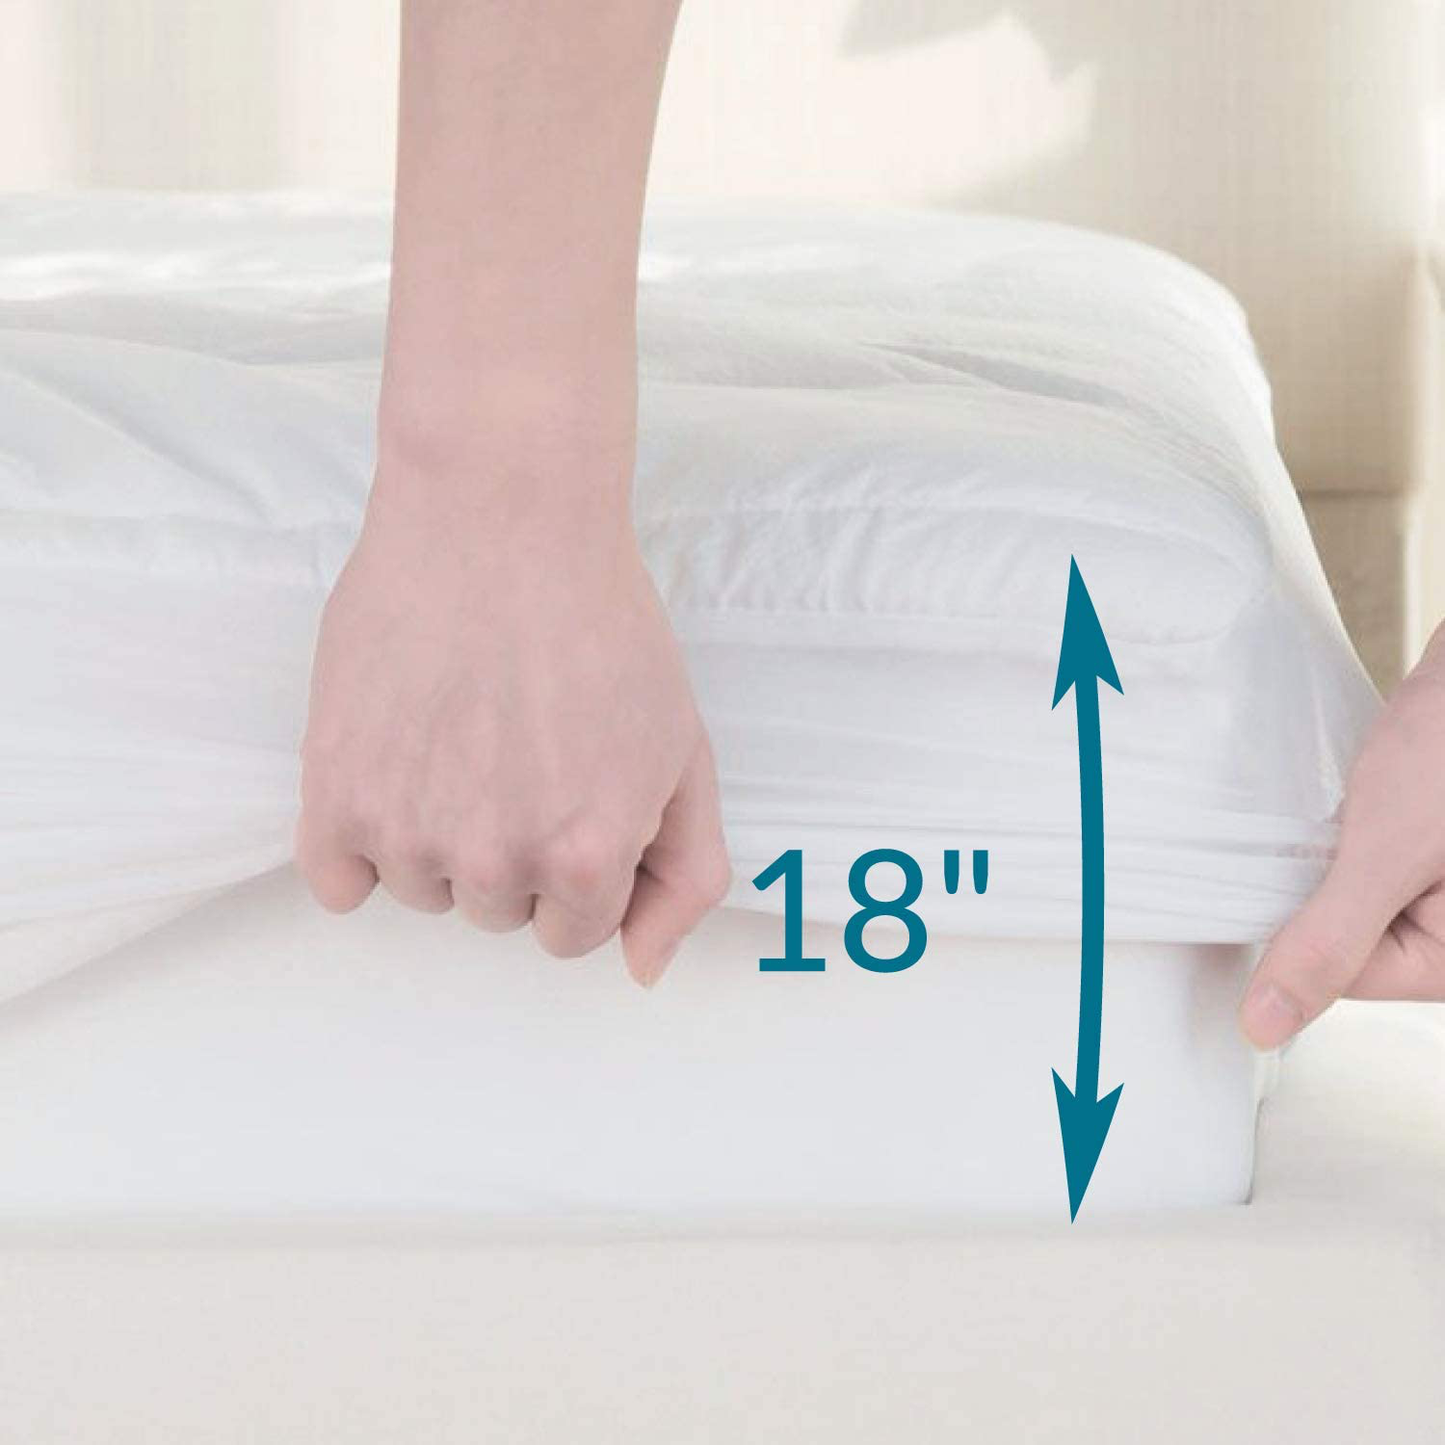 Bedsure Twin XL Mattress Pad Deep Pocket - Quilted Mattress Cover Extra Long for College Dorm PillowTop Hospital Mattress Protector, Fitted Sheet Mattress Cover, 39x80 inches, White